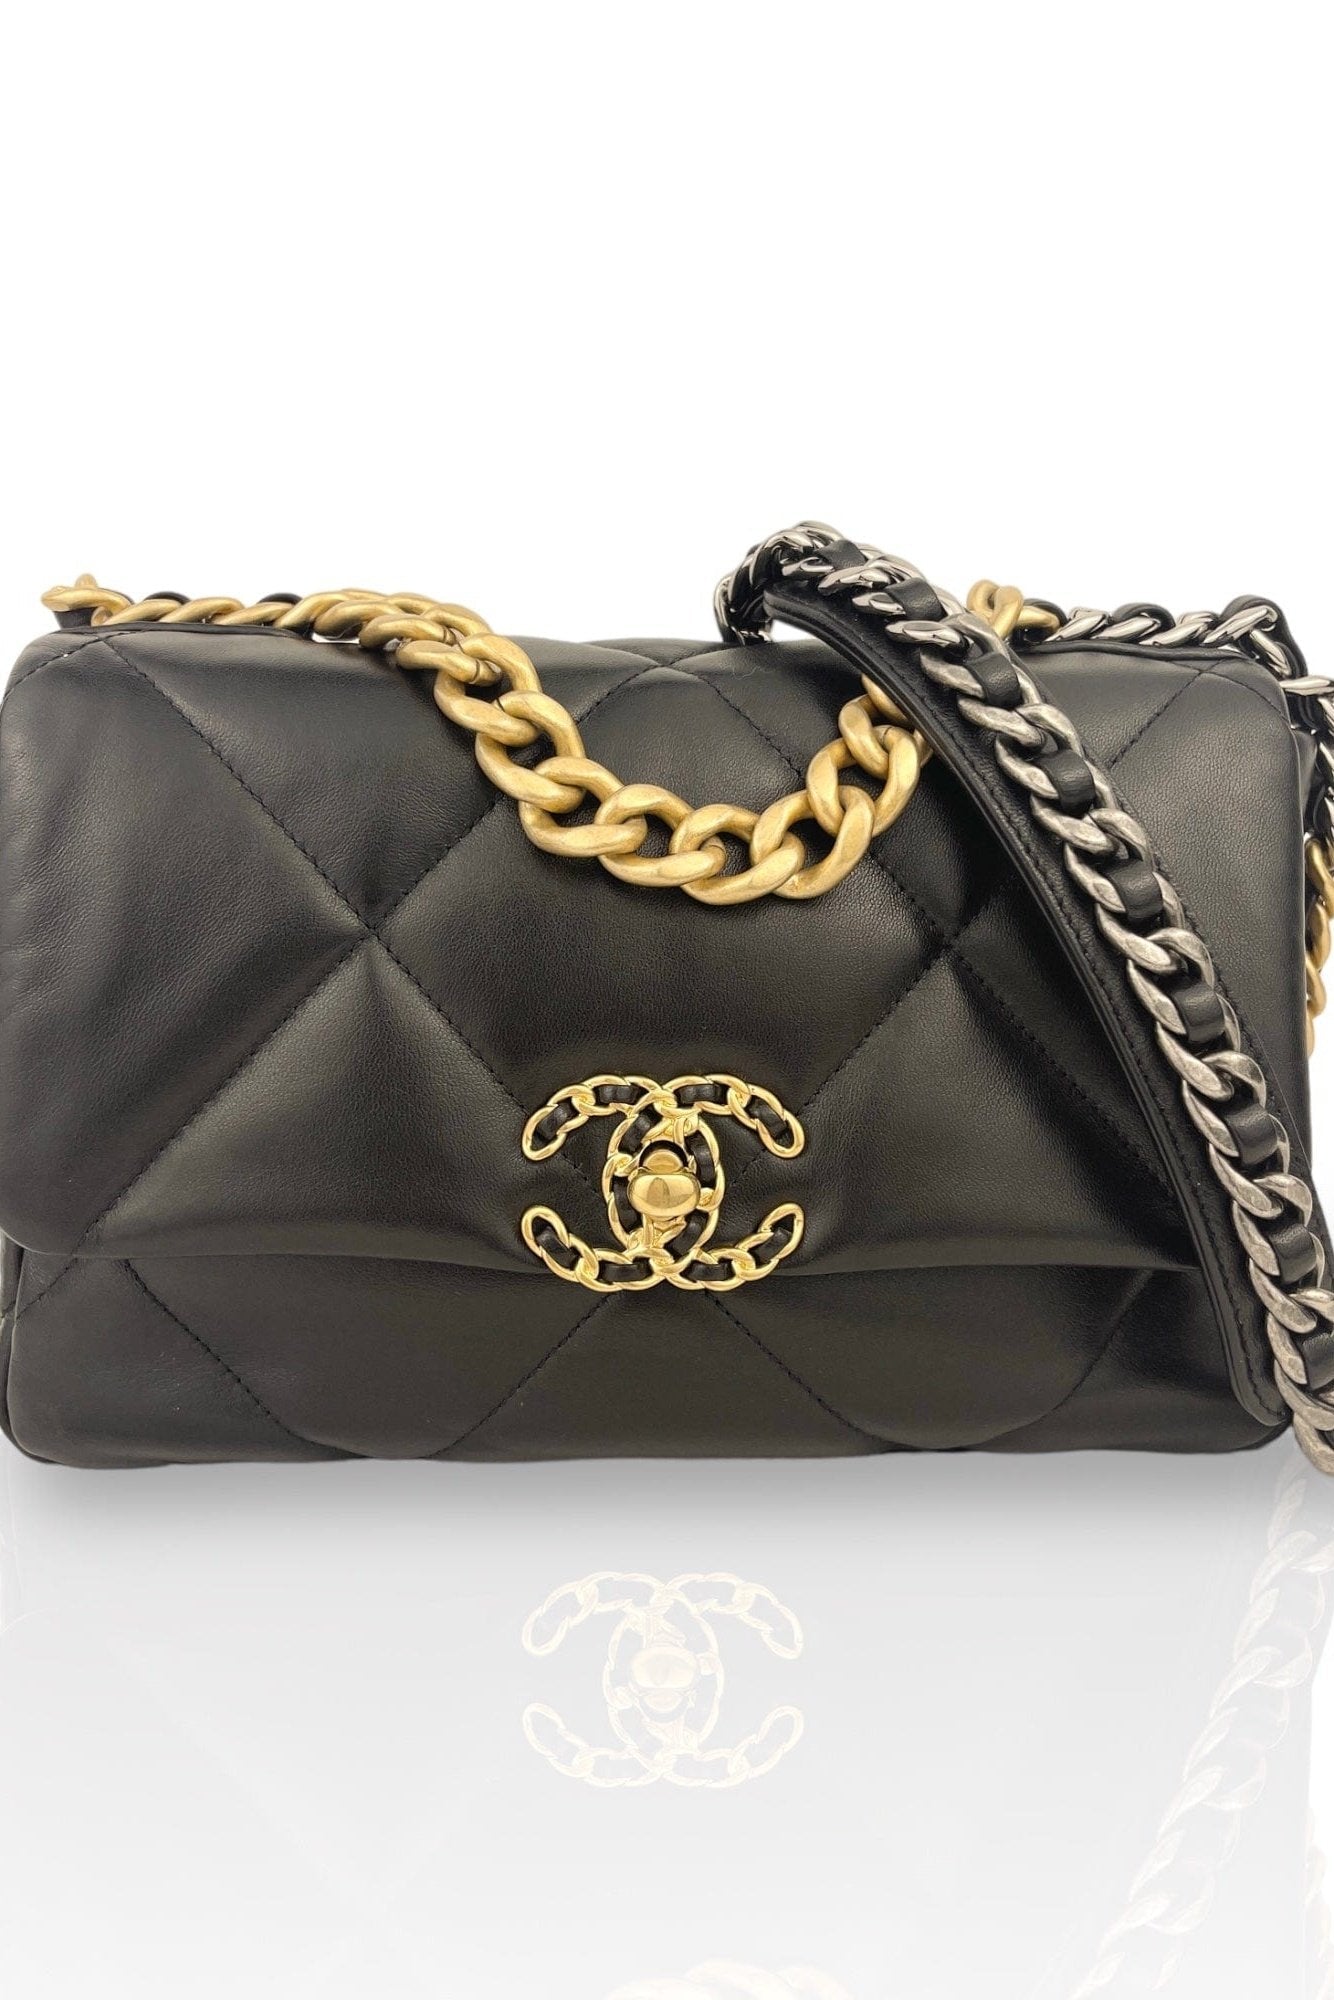 Buy Chanel So Black Lambskin Chevron Medium Classic Flap | Exclusive Sale on Pre-owned Chanel Handbags - REDELUXE